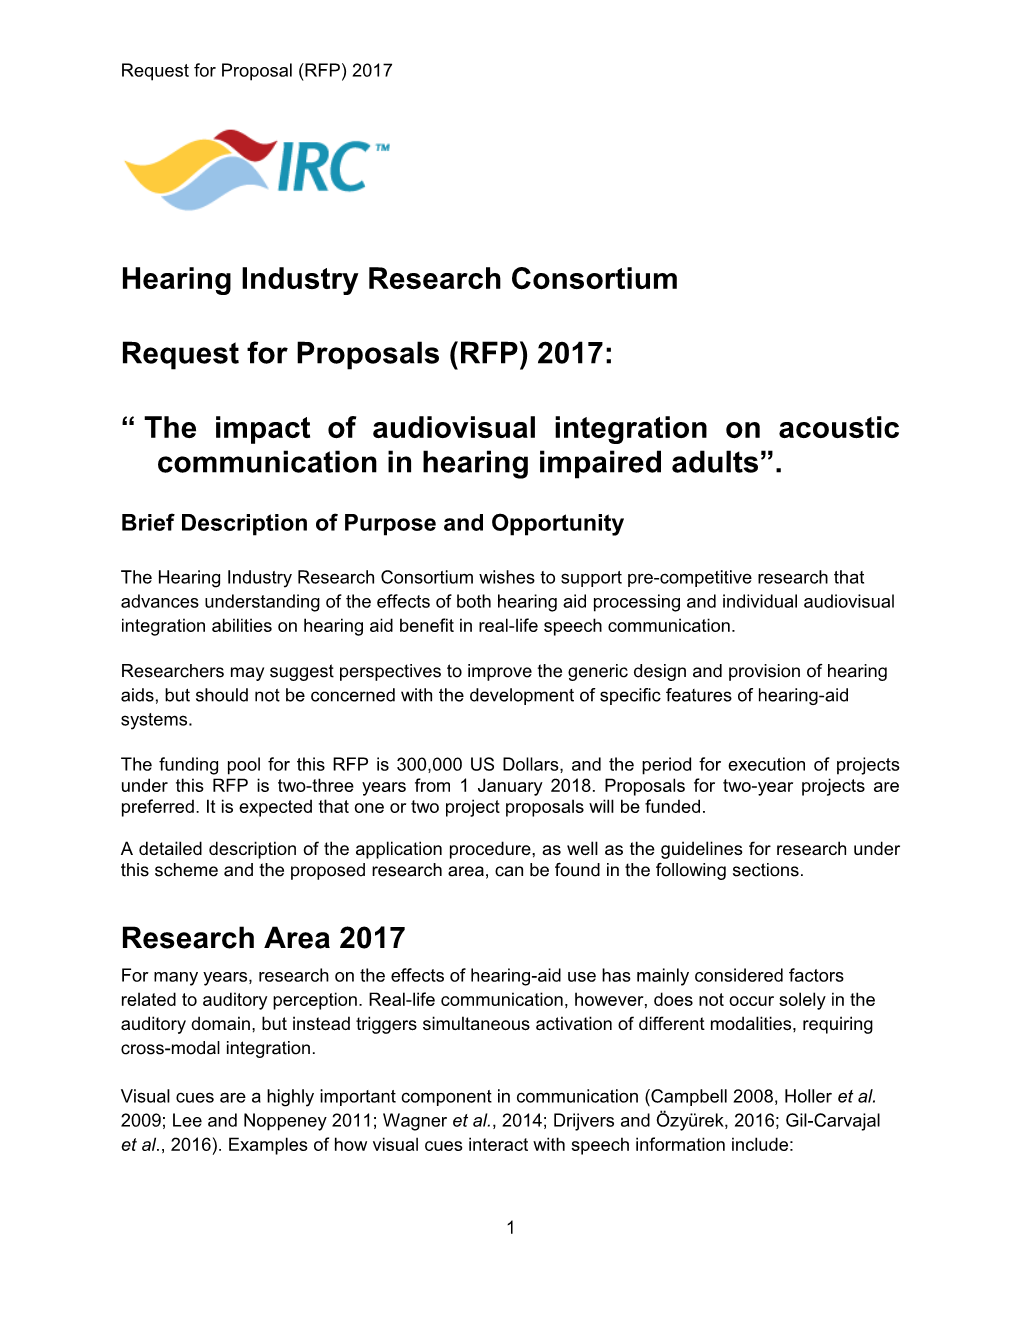 Hearing Industry Research Consortium